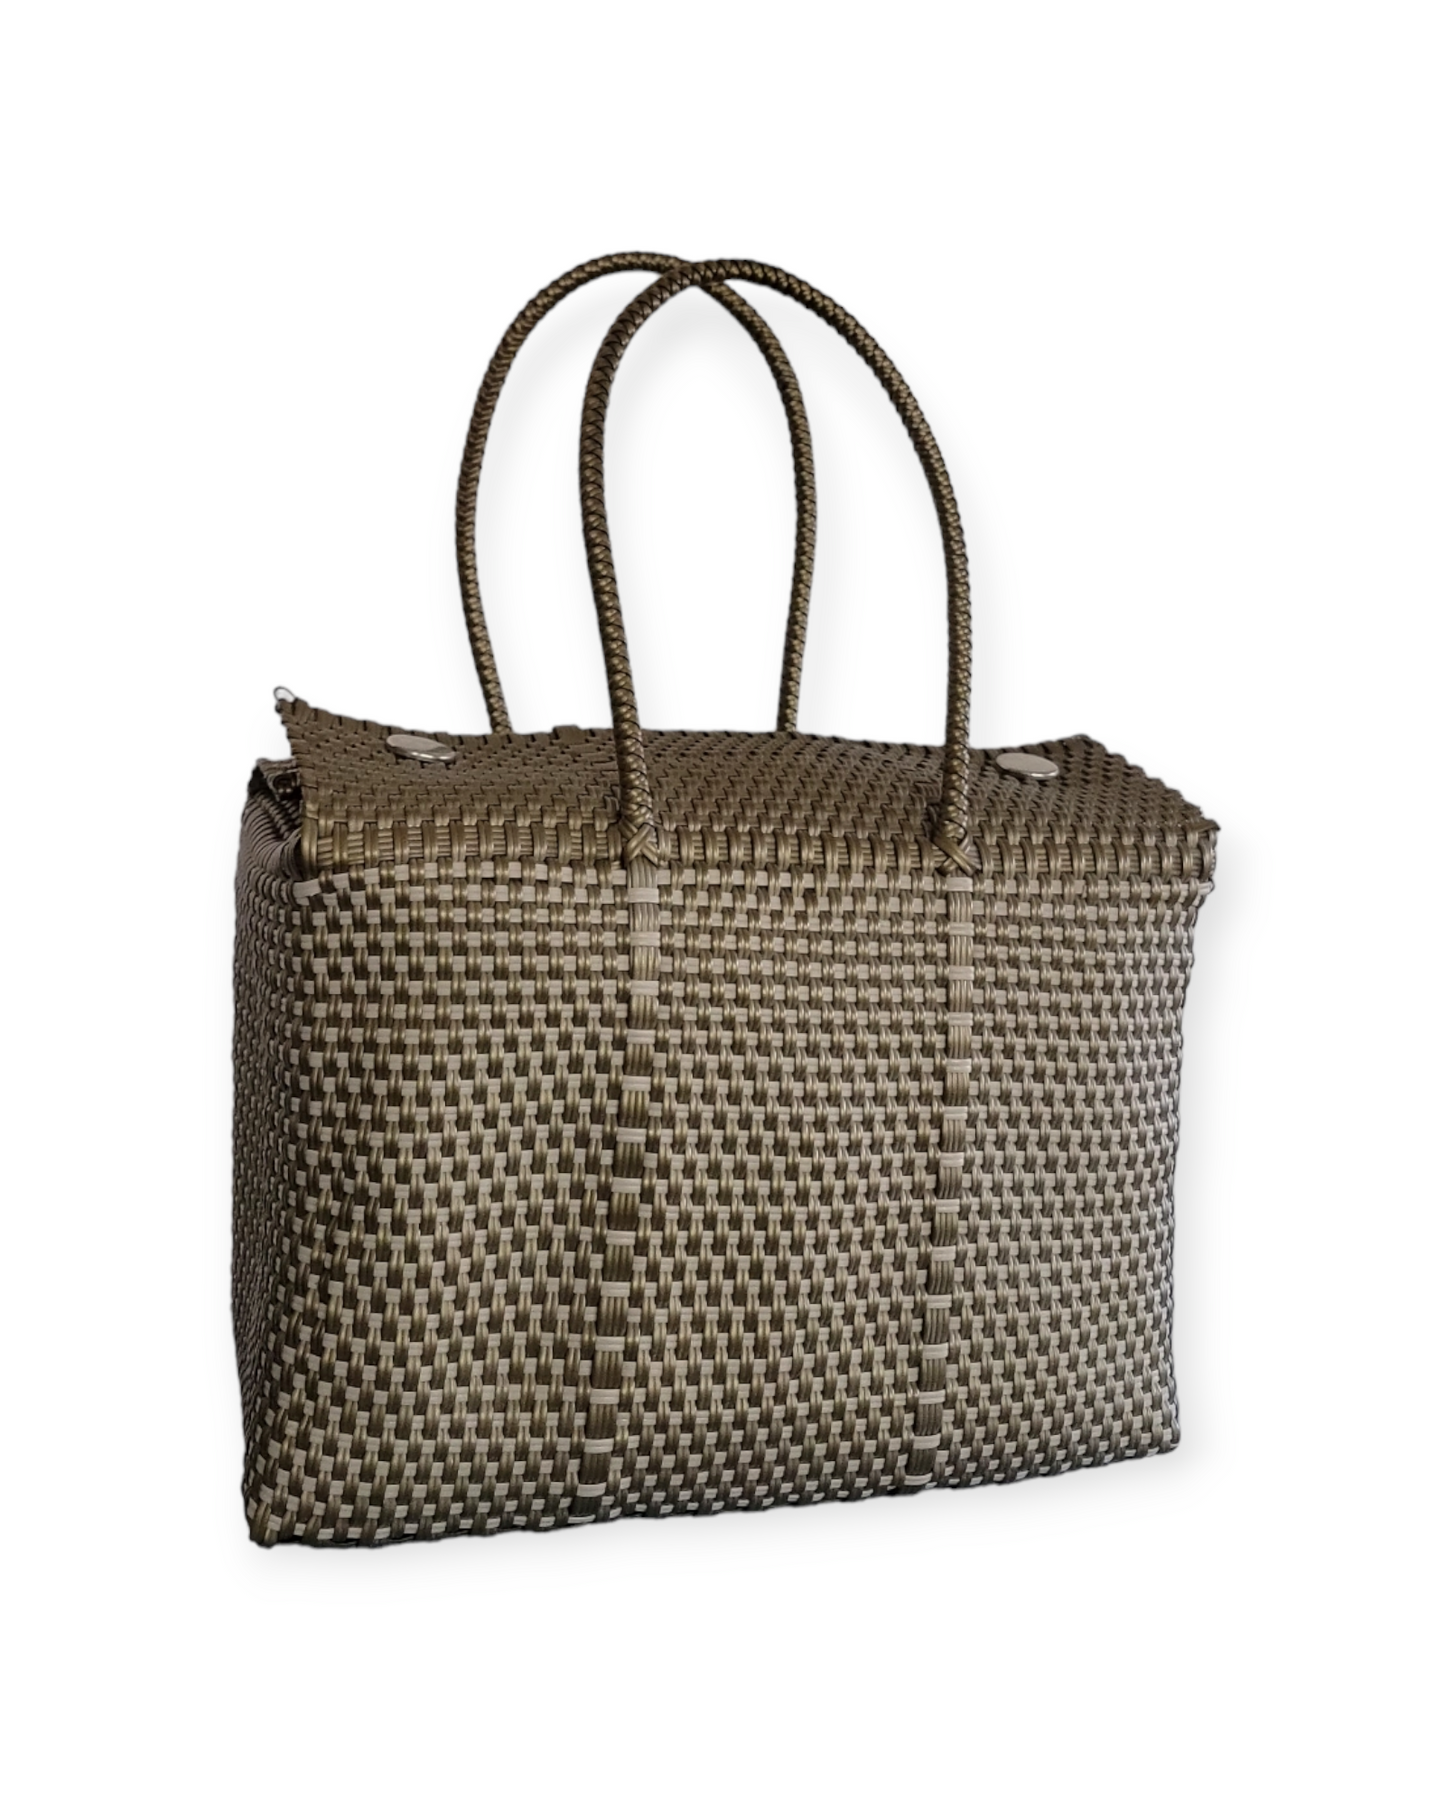 Be Praia | Gold with Gold Details XL Basket | Eco-Friendly Handwoven Bag